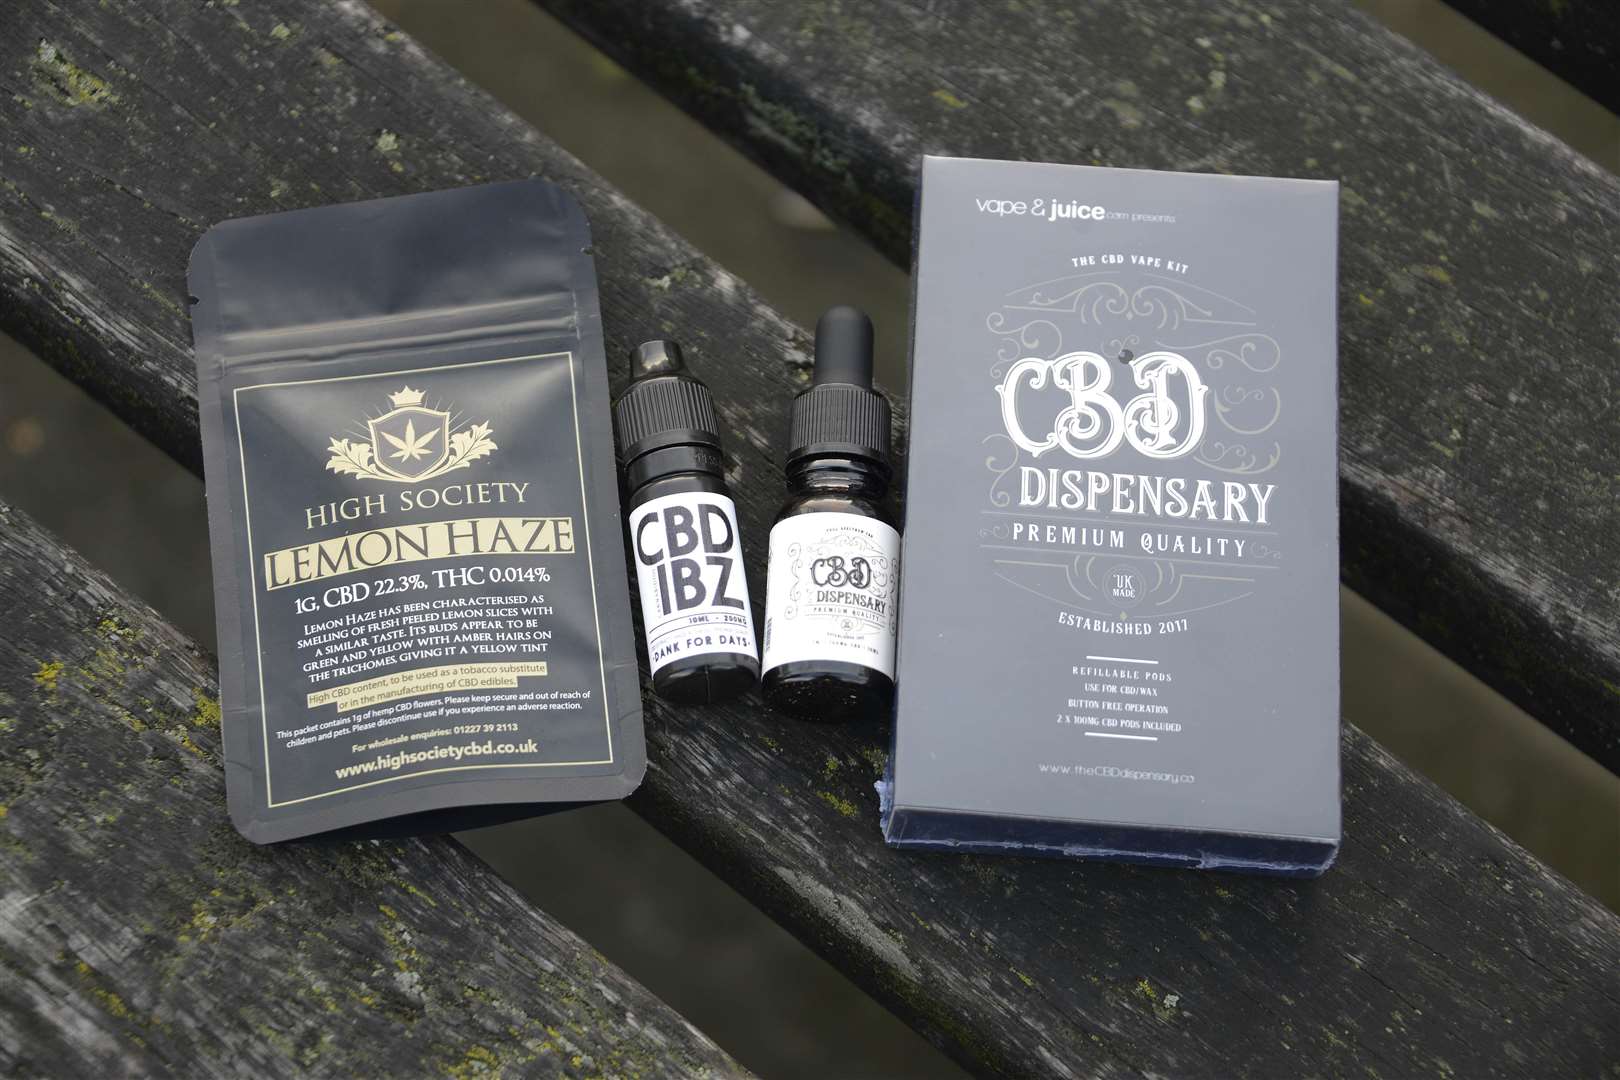 Some of the CBD products. Picture: Paul Amos